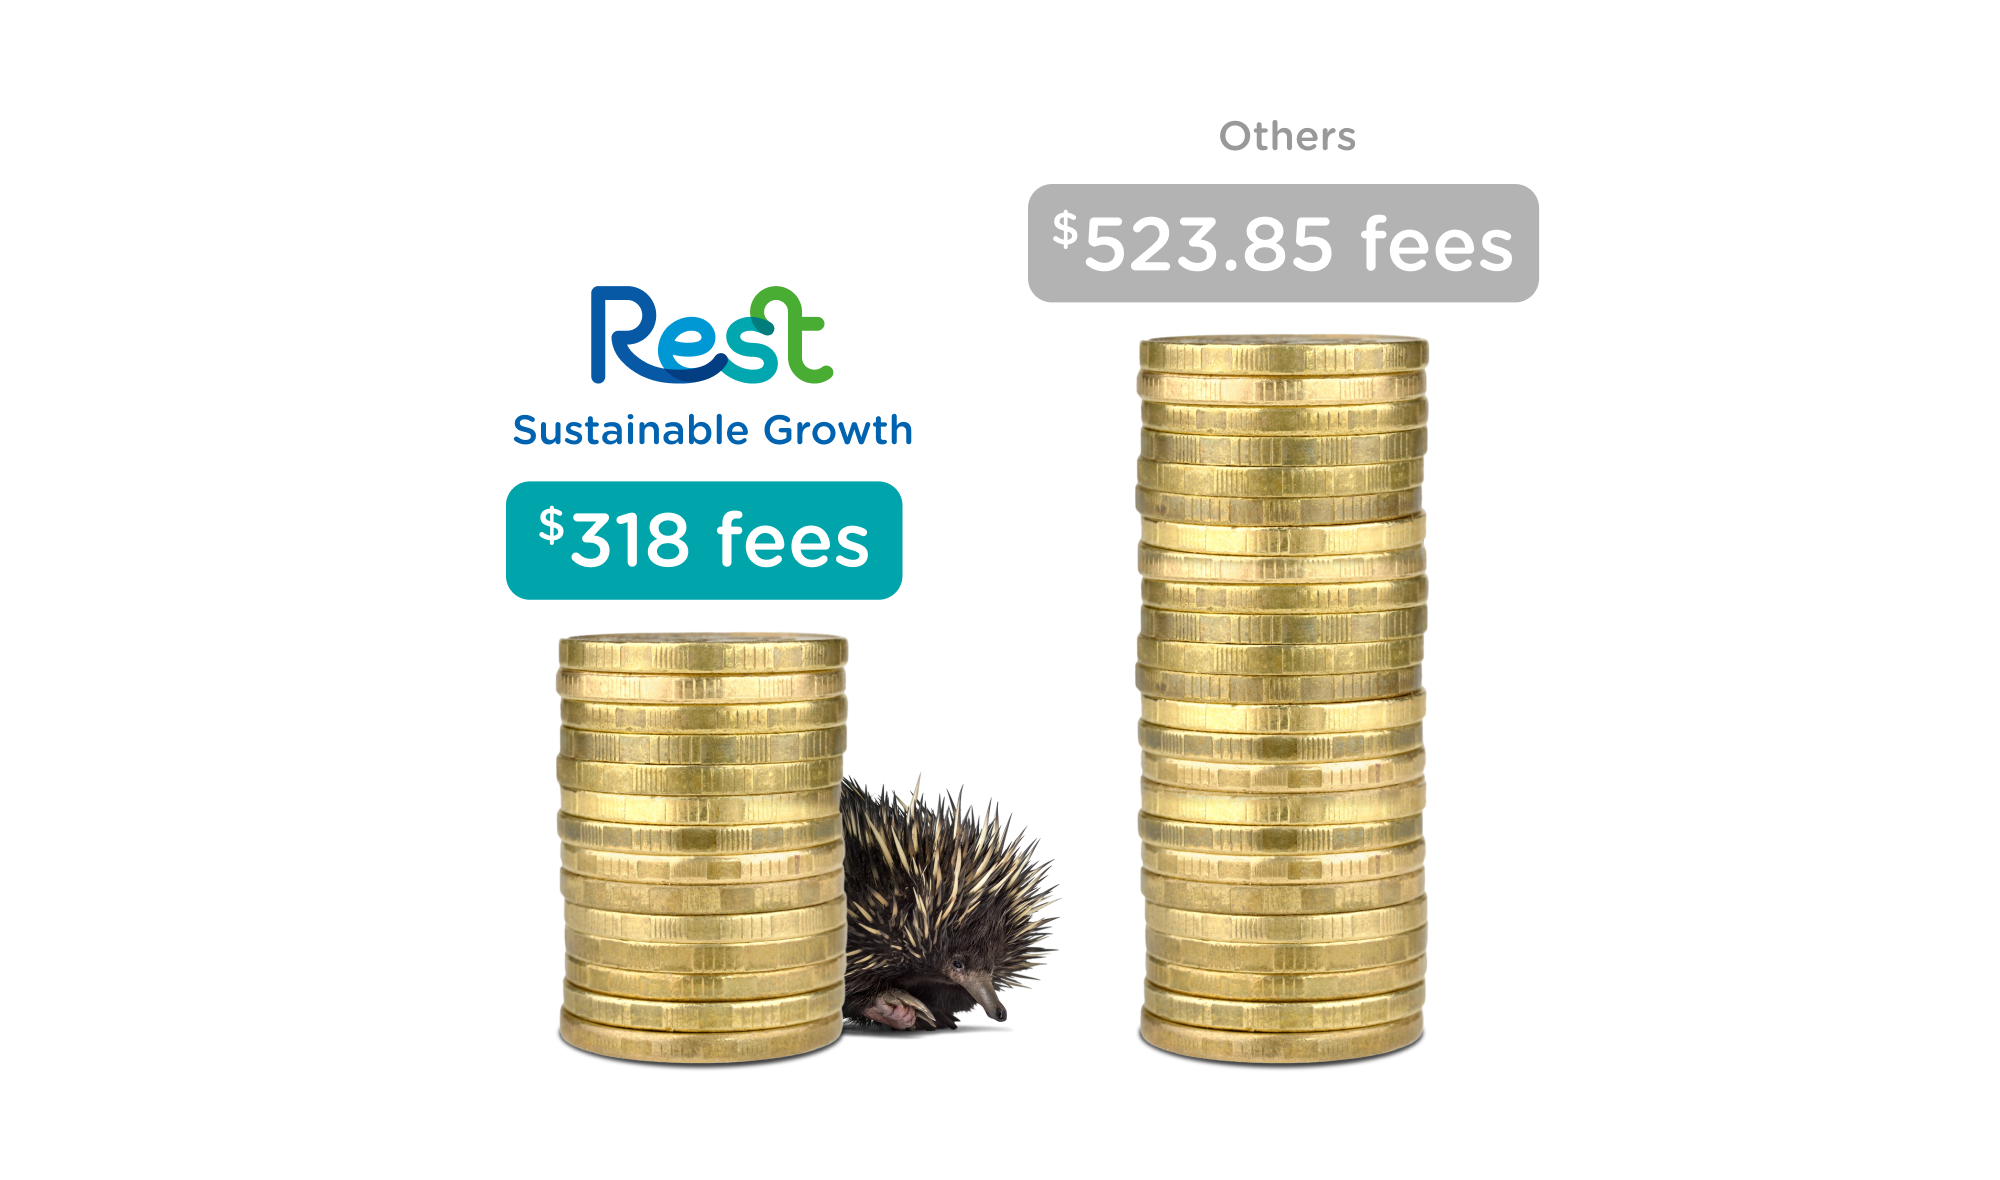 Our Sustainable Growth option has 38%* lower fees  compared with the average ethical super option.